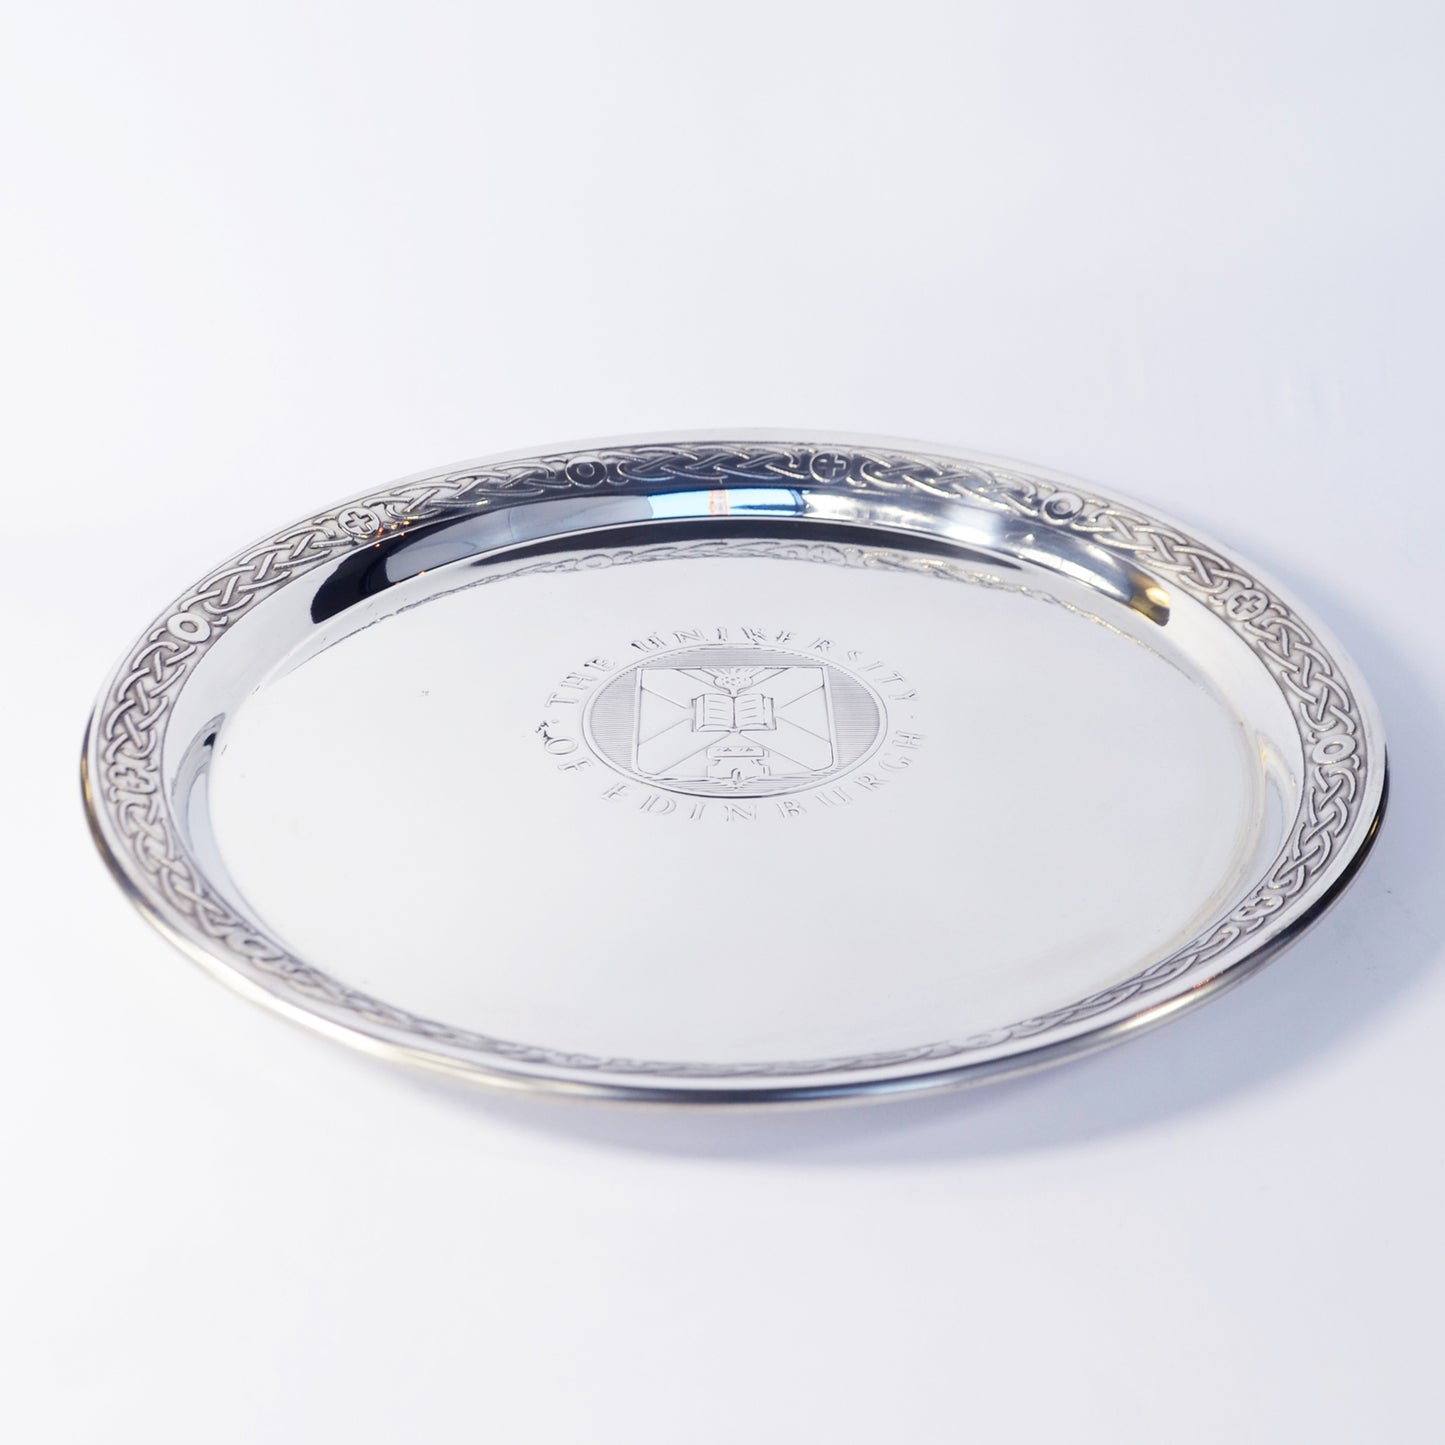 The large pewter salver seen diagonally from above, with the University crest visible